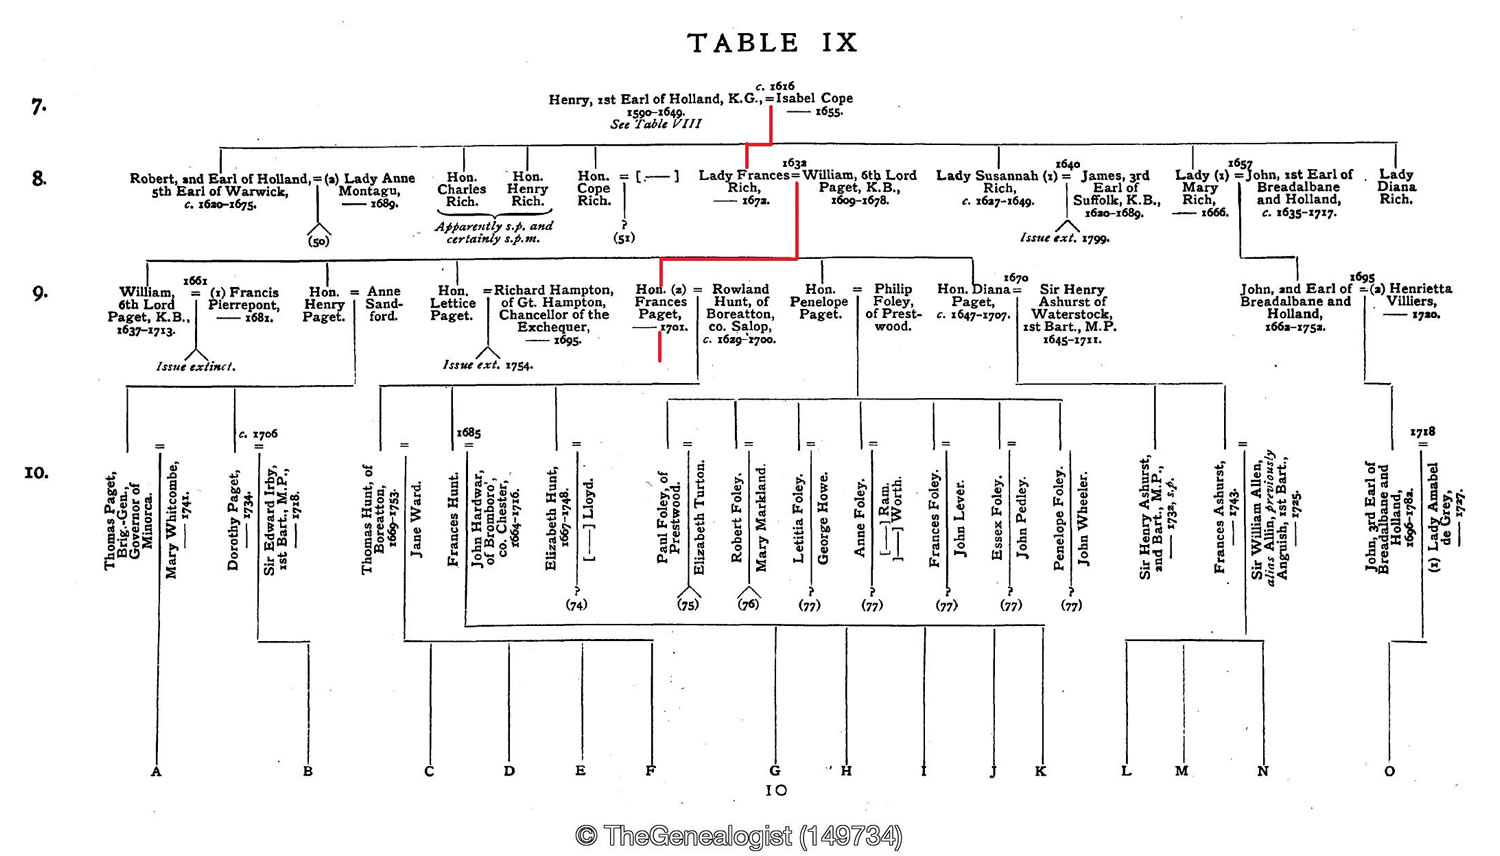 We can find a record on TheGenealogist that shows Josh's ancestors as recorded in the Royal Blood of Britain, The Plantagenet Roll – The Isabel of Essex Volume